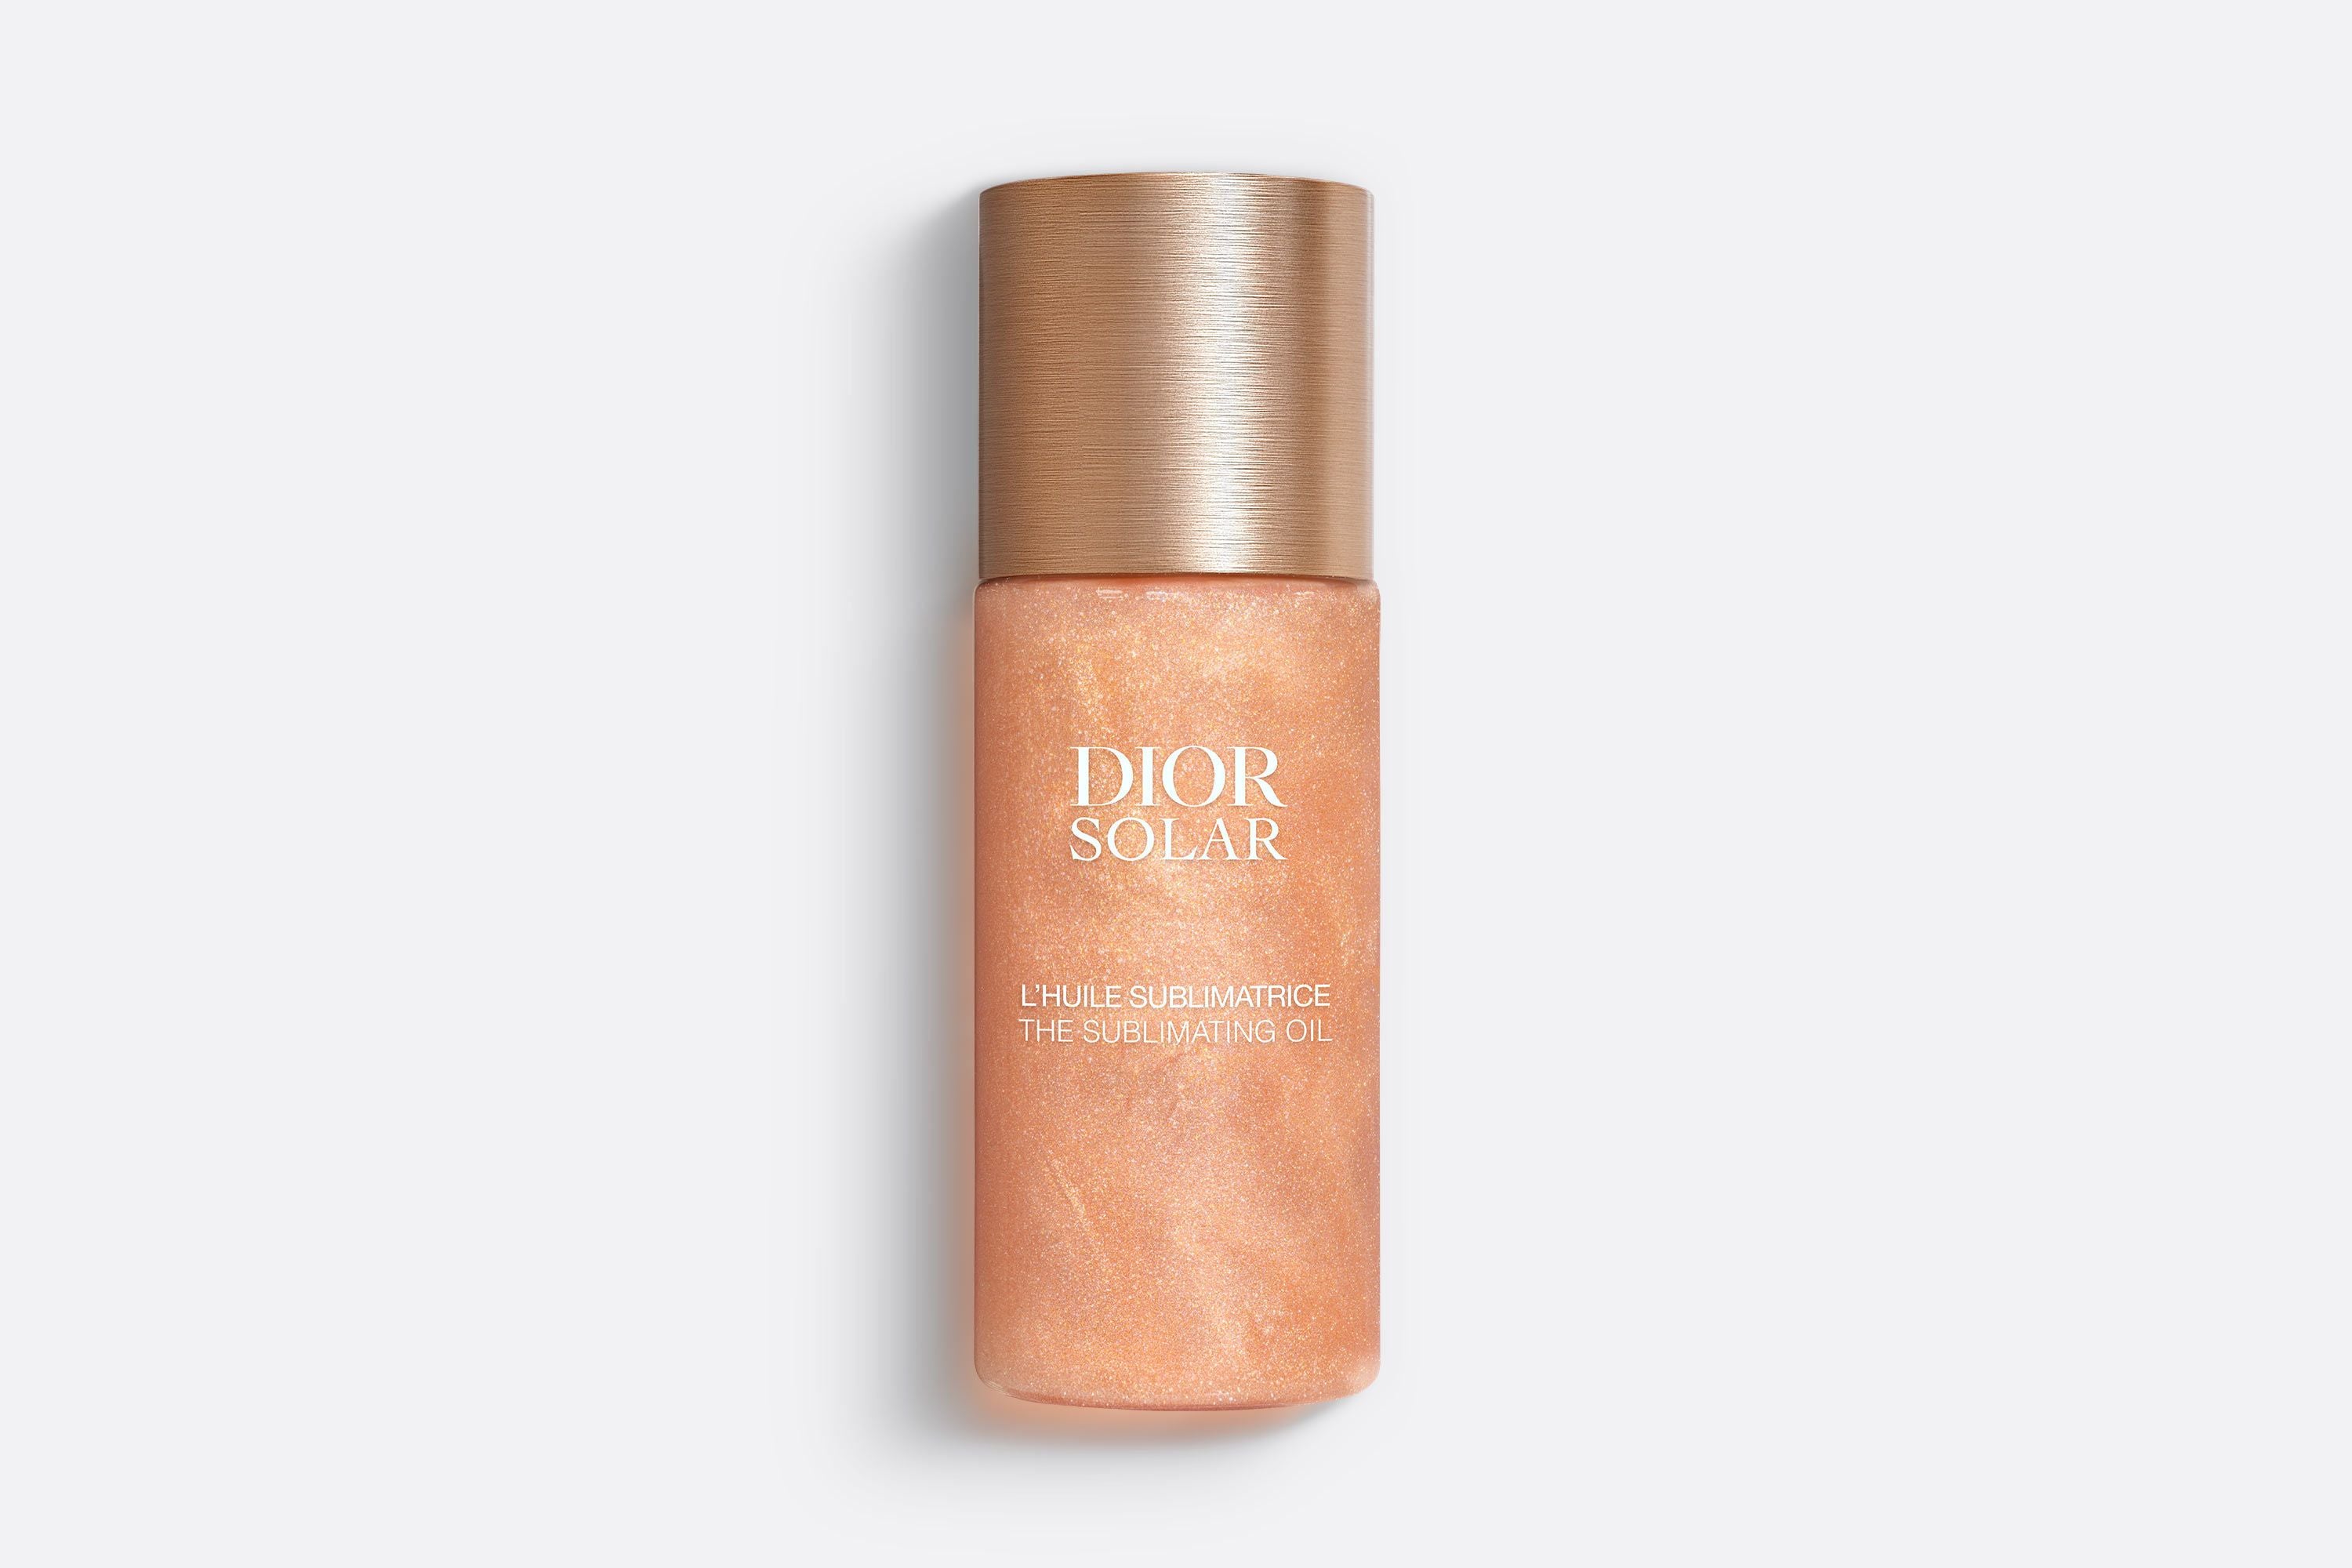 Diorsnow  The collections  Skincare  DIOR